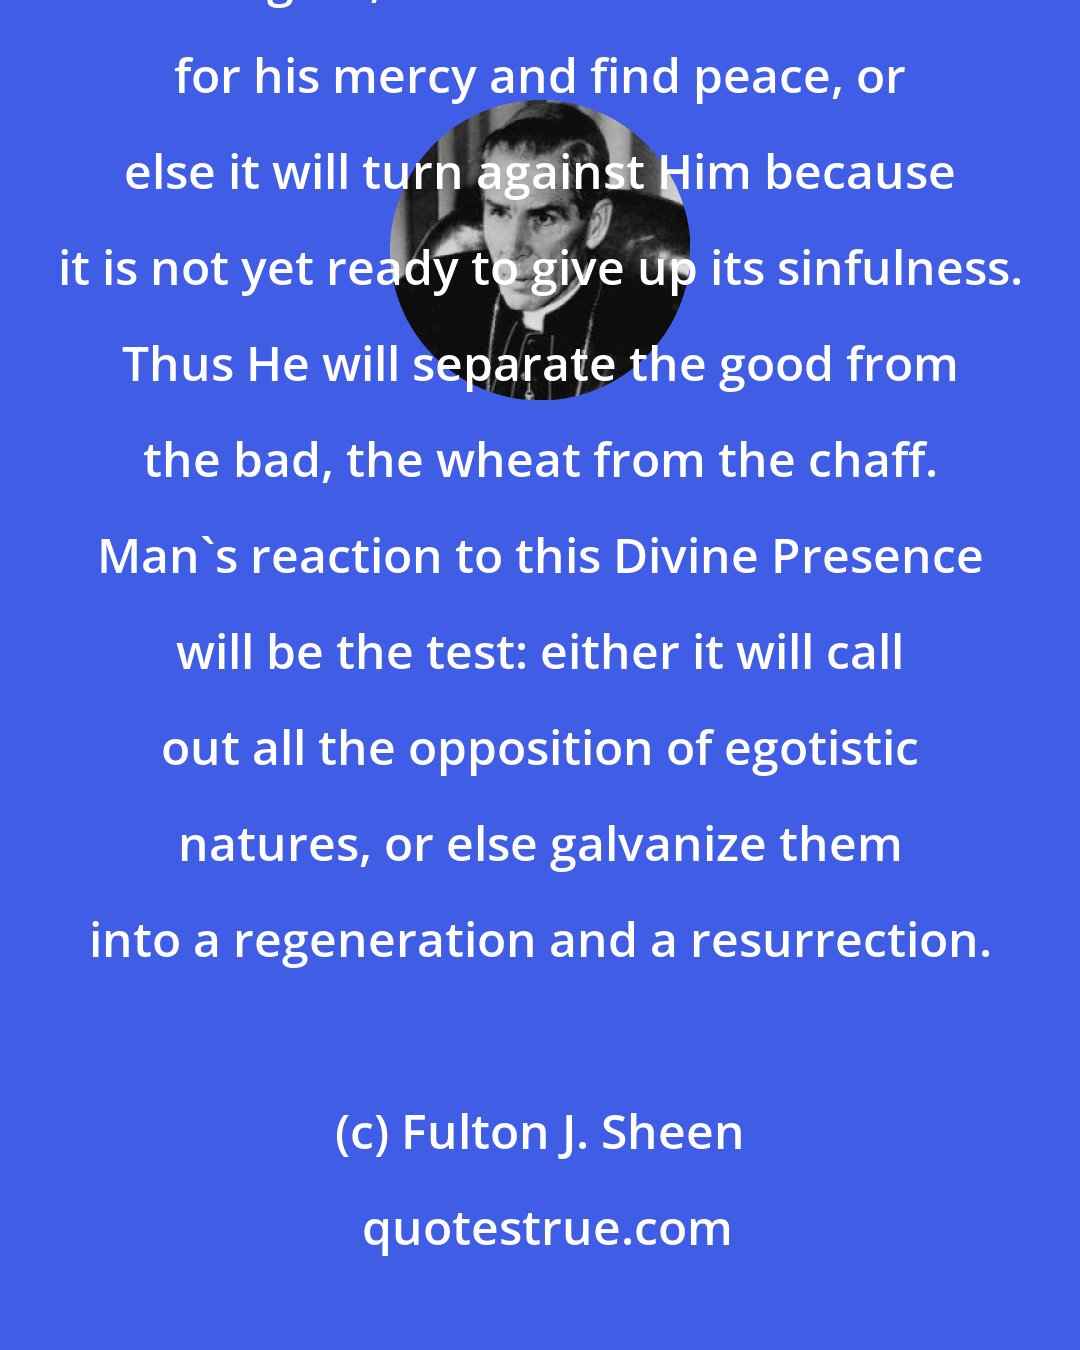 Fulton J. Sheen: The nearer Christ comes to a heart, the more it becomes conscious of its guilt; it will then either ask for his mercy and find peace, or else it will turn against Him because it is not yet ready to give up its sinfulness. Thus He will separate the good from the bad, the wheat from the chaff. Man's reaction to this Divine Presence will be the test: either it will call out all the opposition of egotistic natures, or else galvanize them into a regeneration and a resurrection.